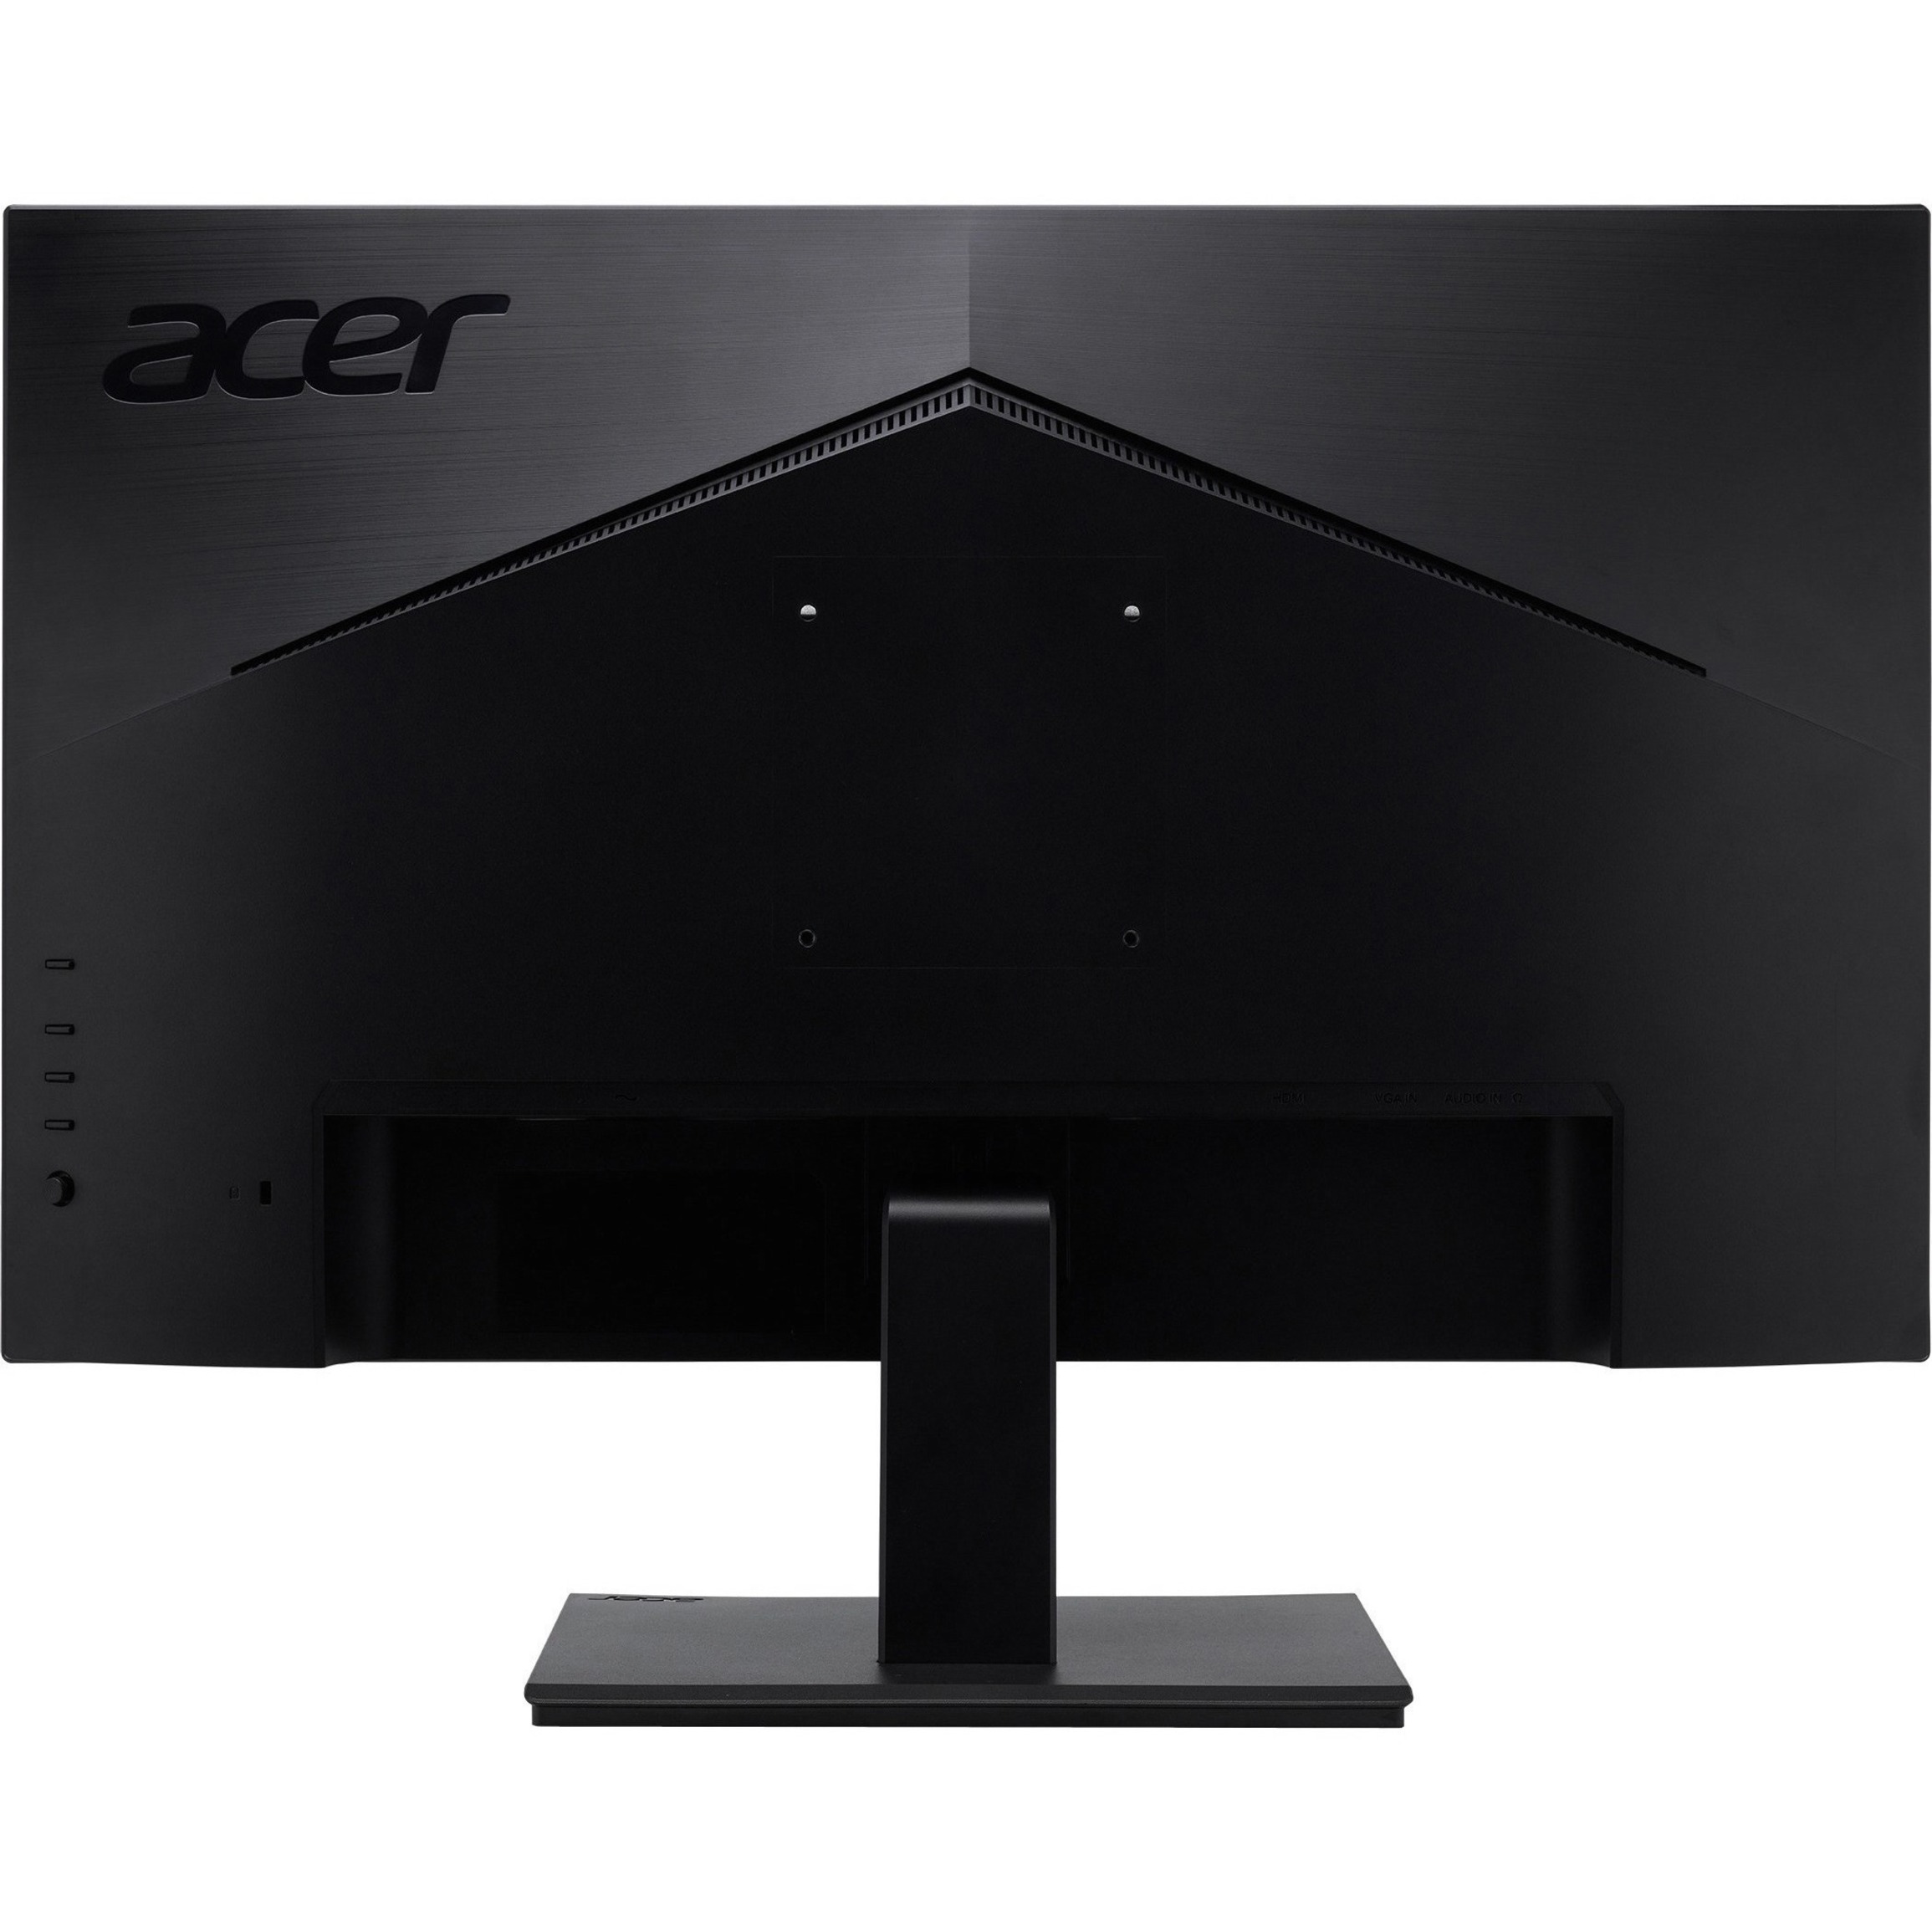 Acer V247Y A Full HD LCD Monitor, 16:9, Black - image 2 of 7